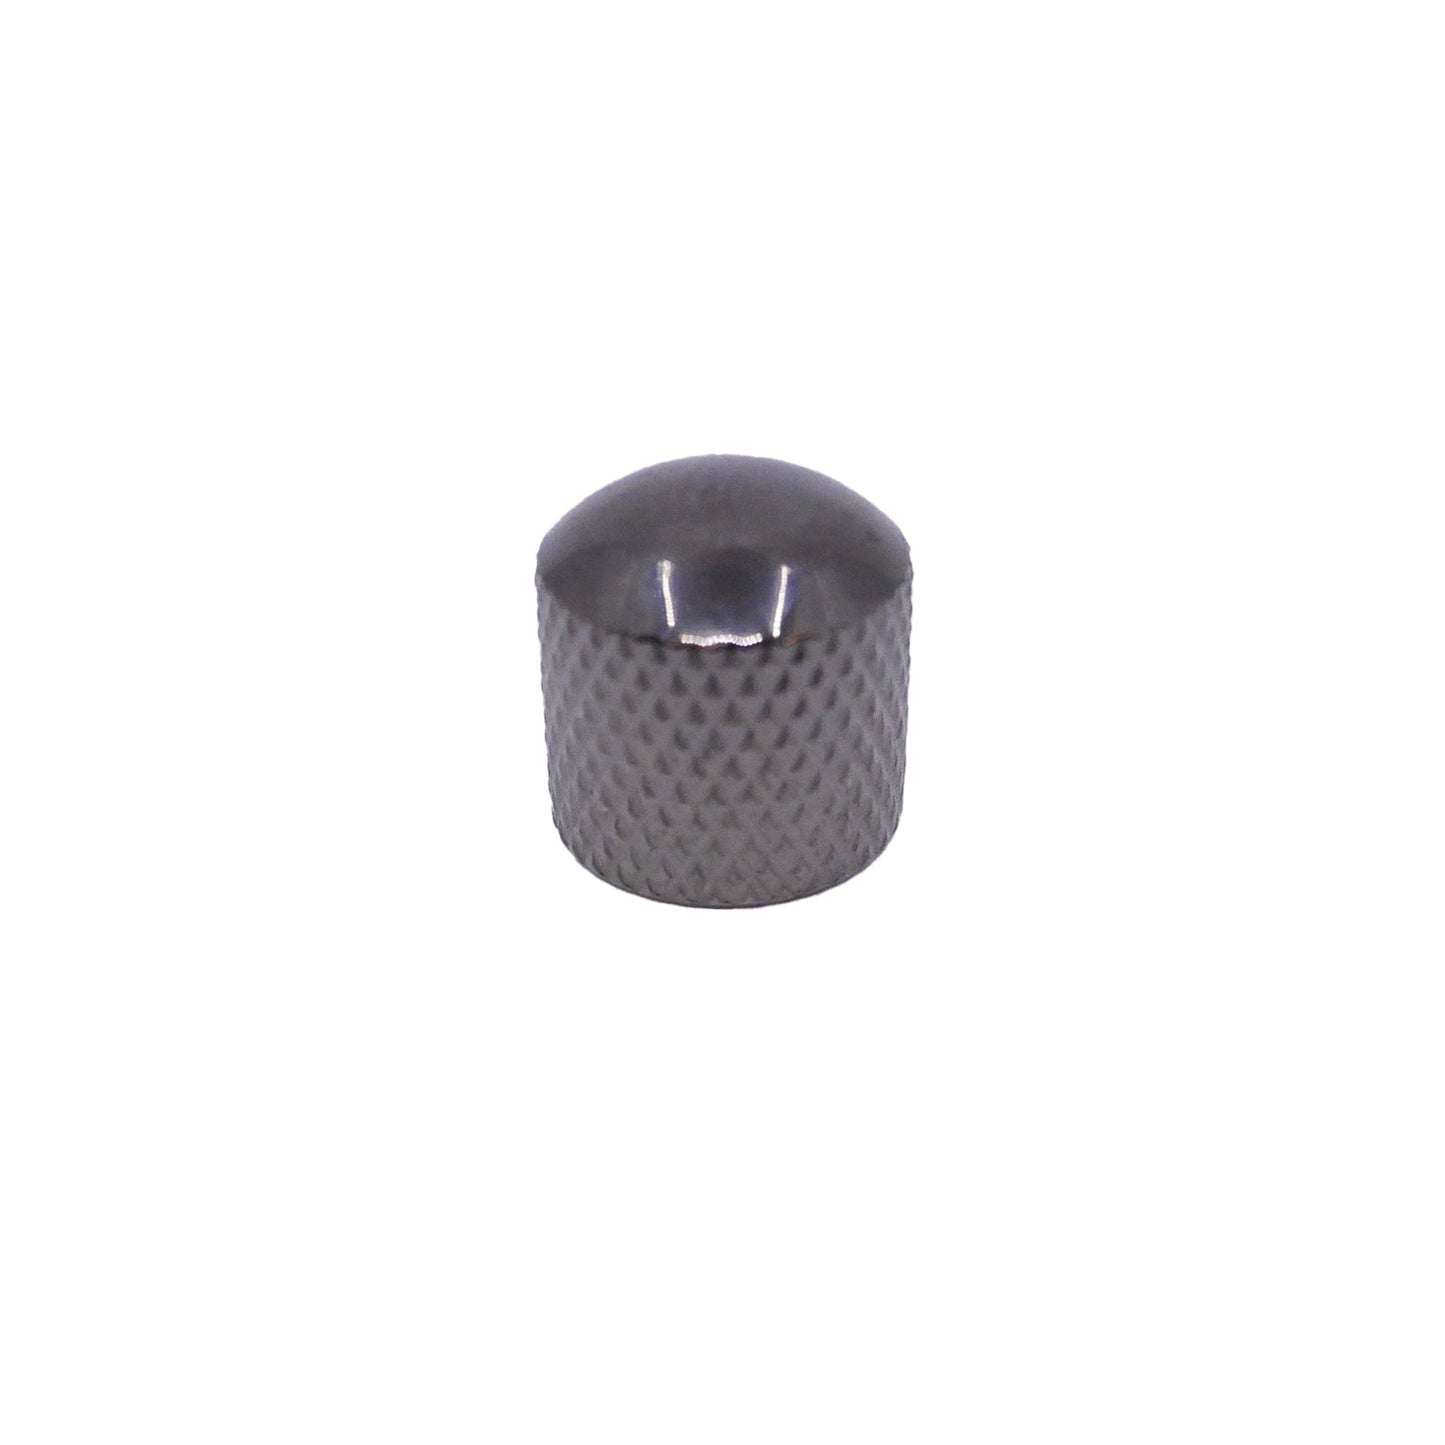 Smoked Chrome Solid Shaft Knurled Dome Knob (S5D1)